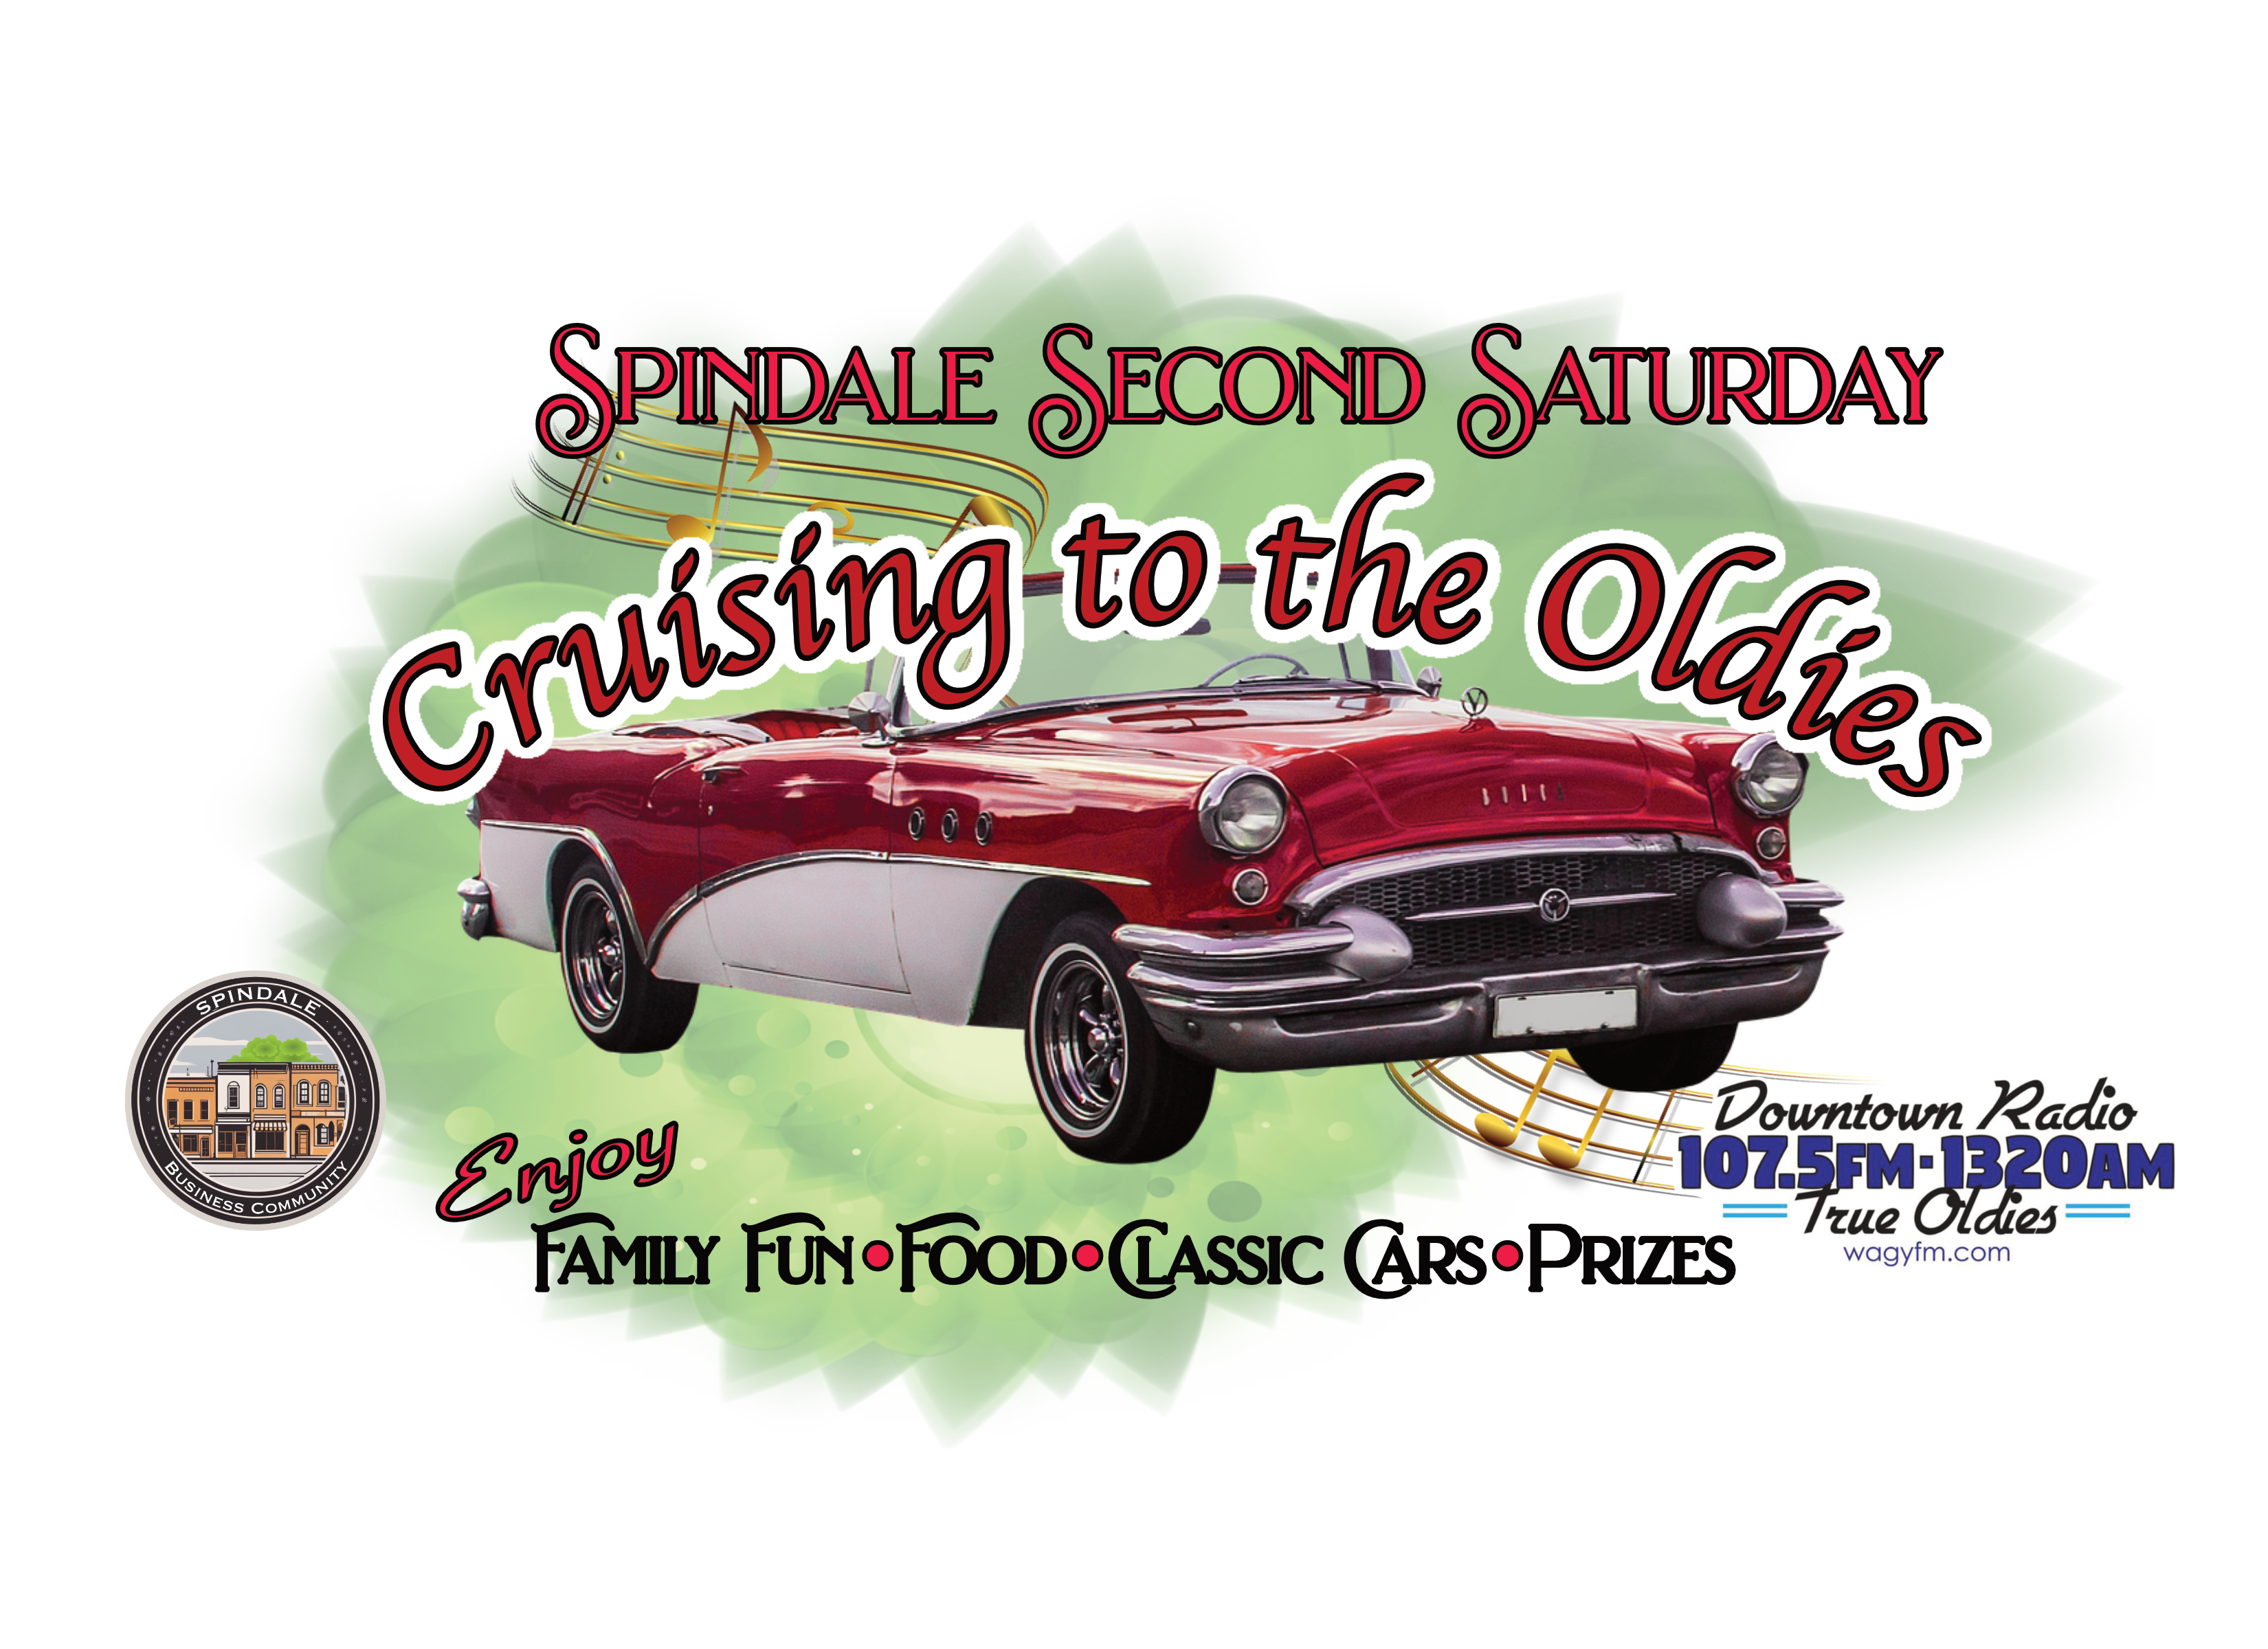 Spindale Second Saturday - Cruising to the Oldies